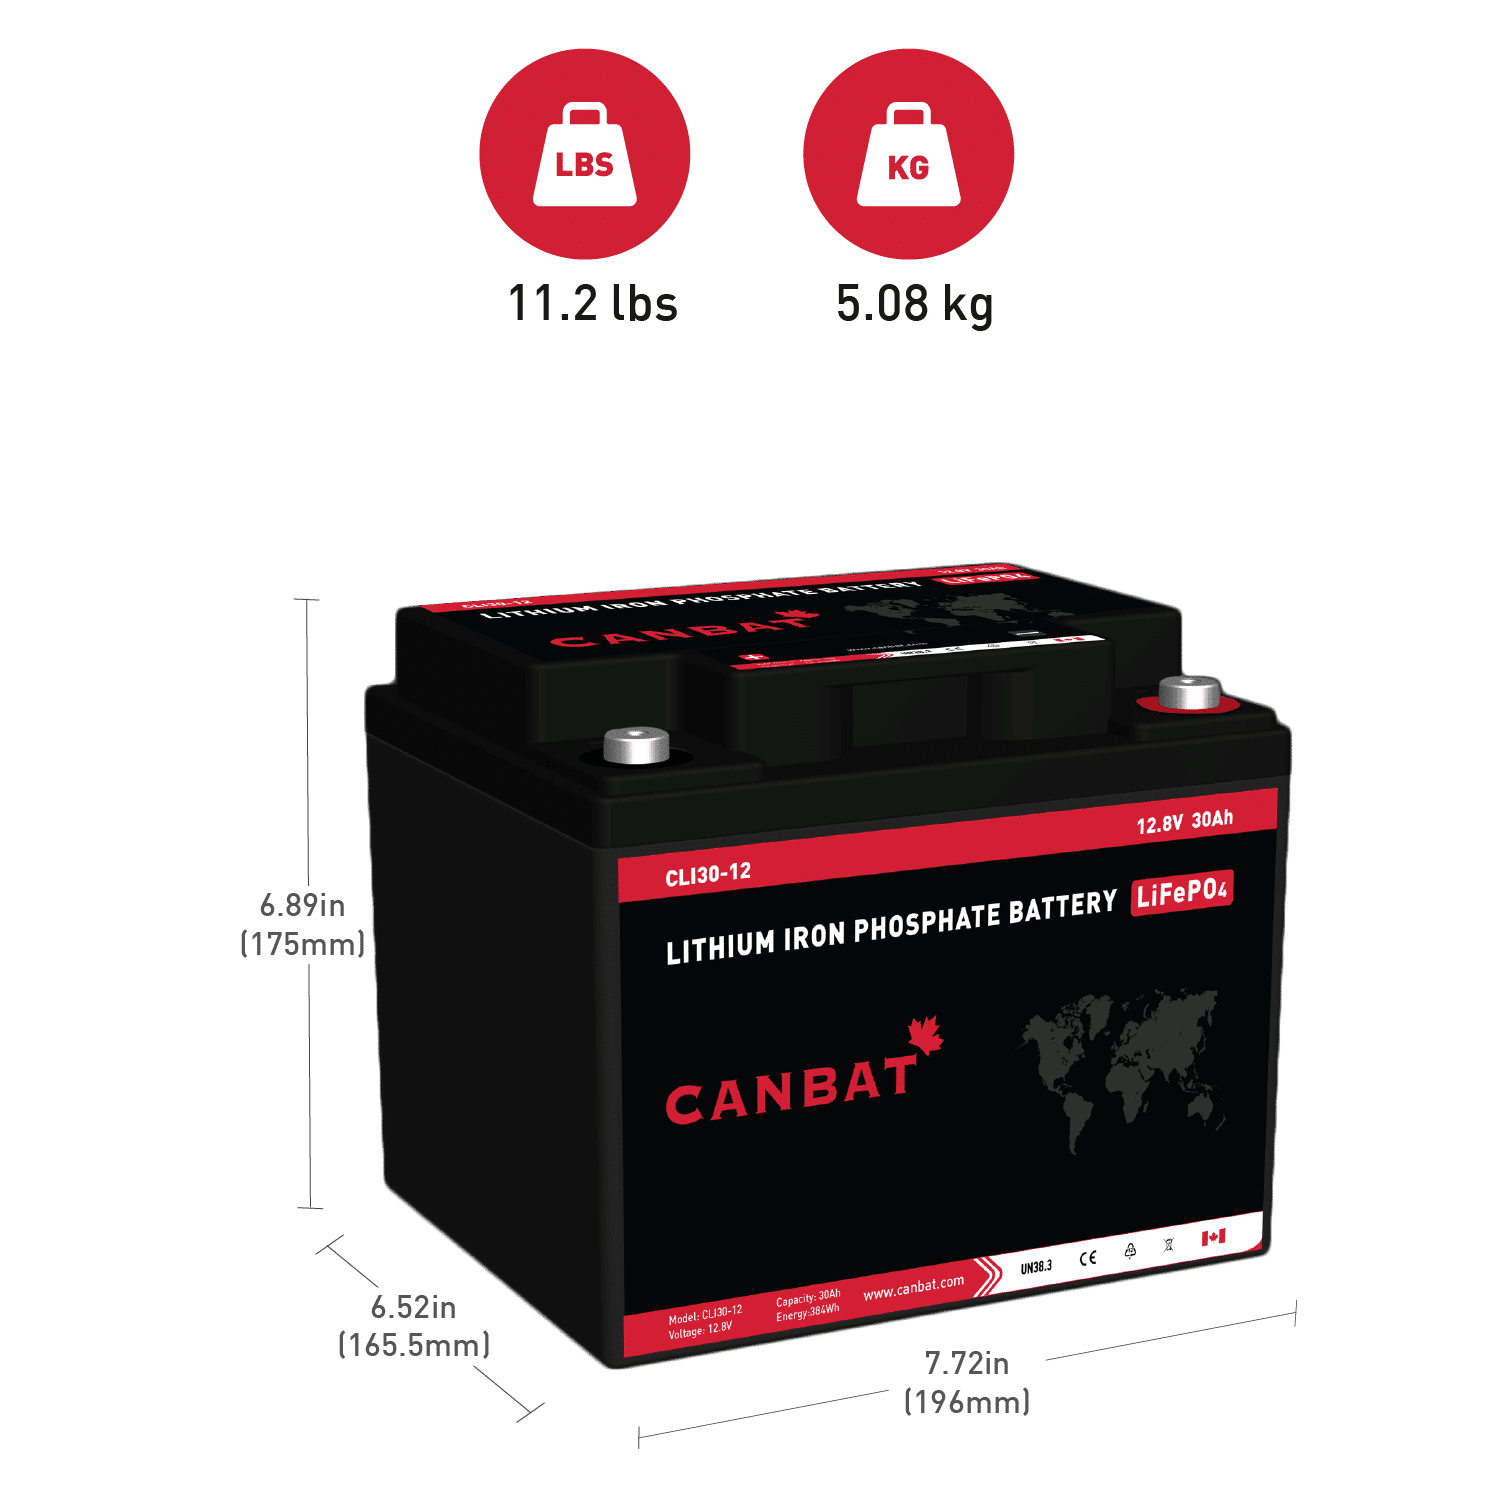 Canbat 12V 30Ah Lithium Battery Dimensions and Weight